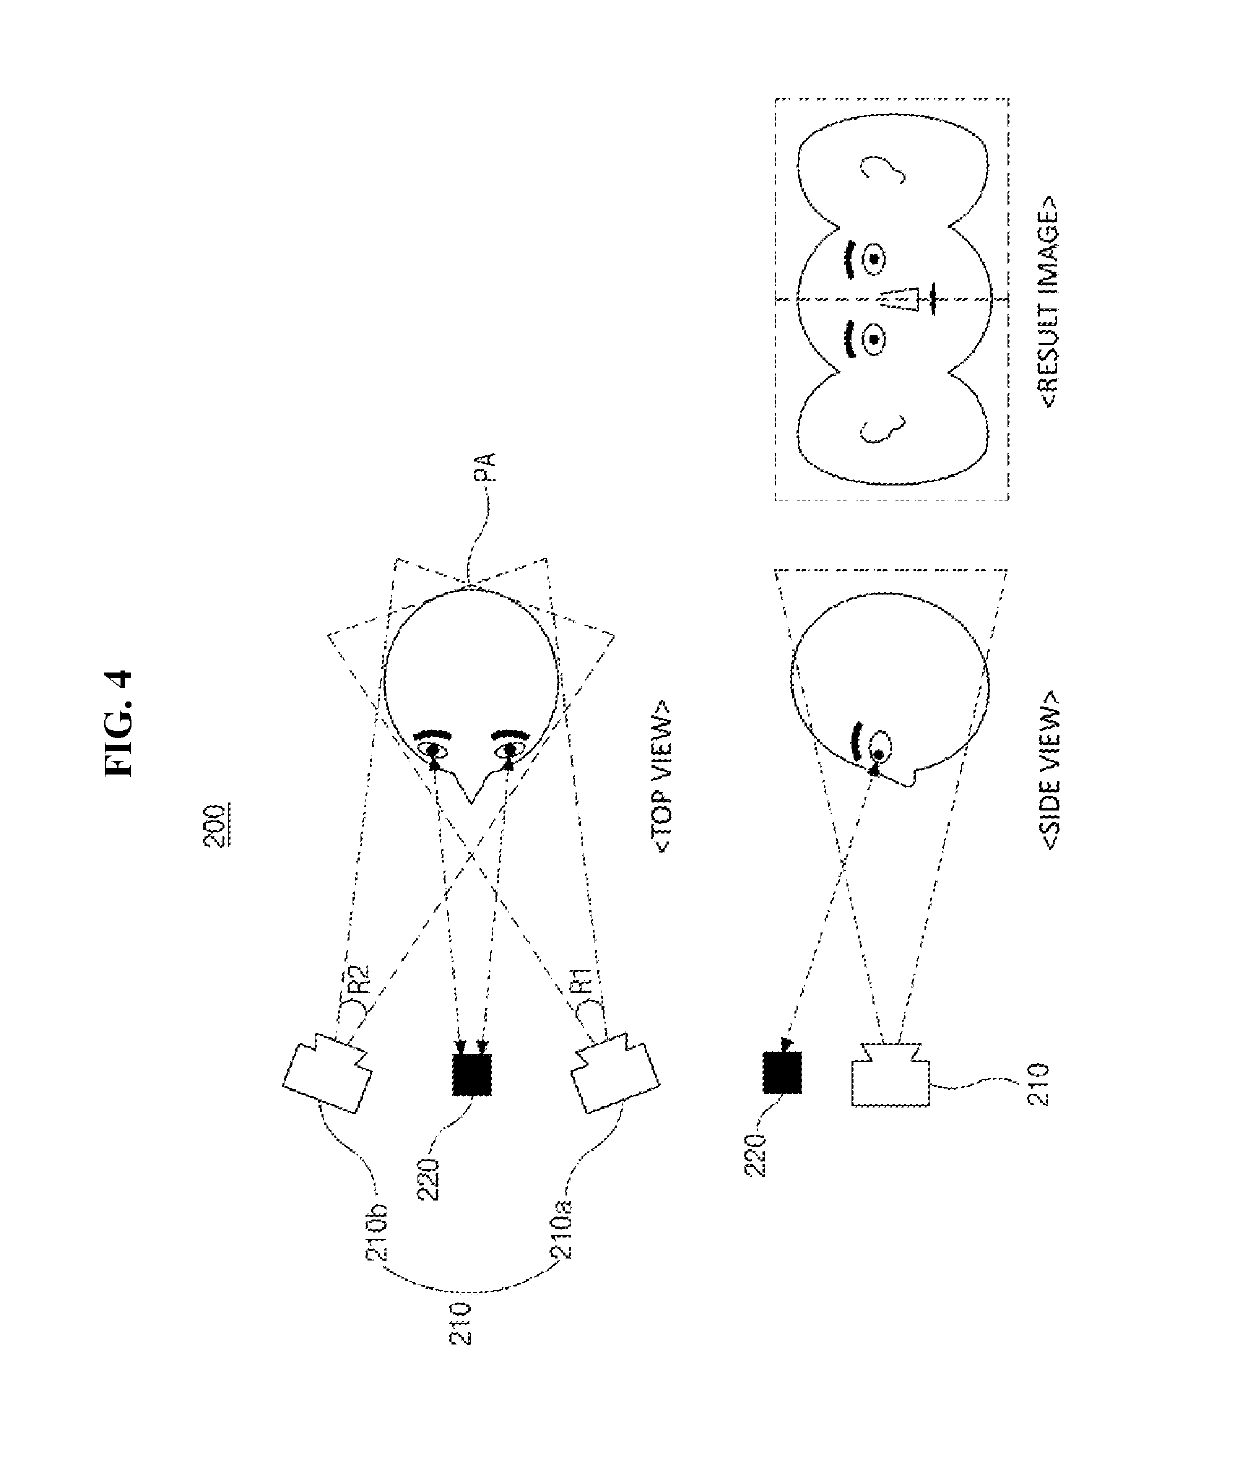 Medical imaging system and operation method therefor